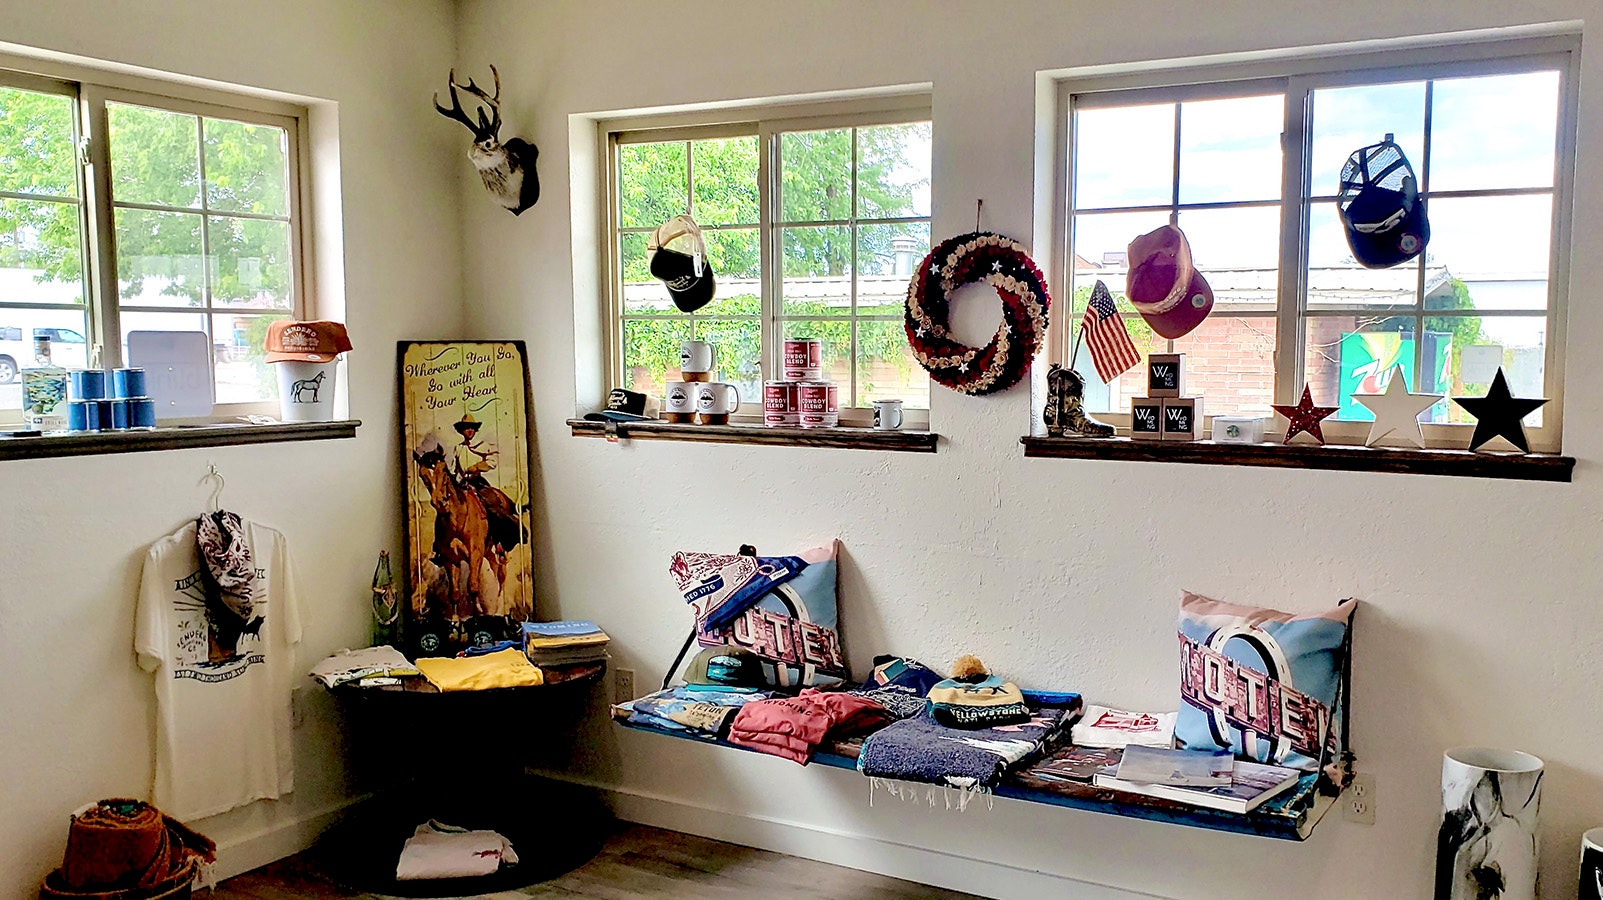 A variety of handmade items and other souvenirs are available for sale in the motel office.